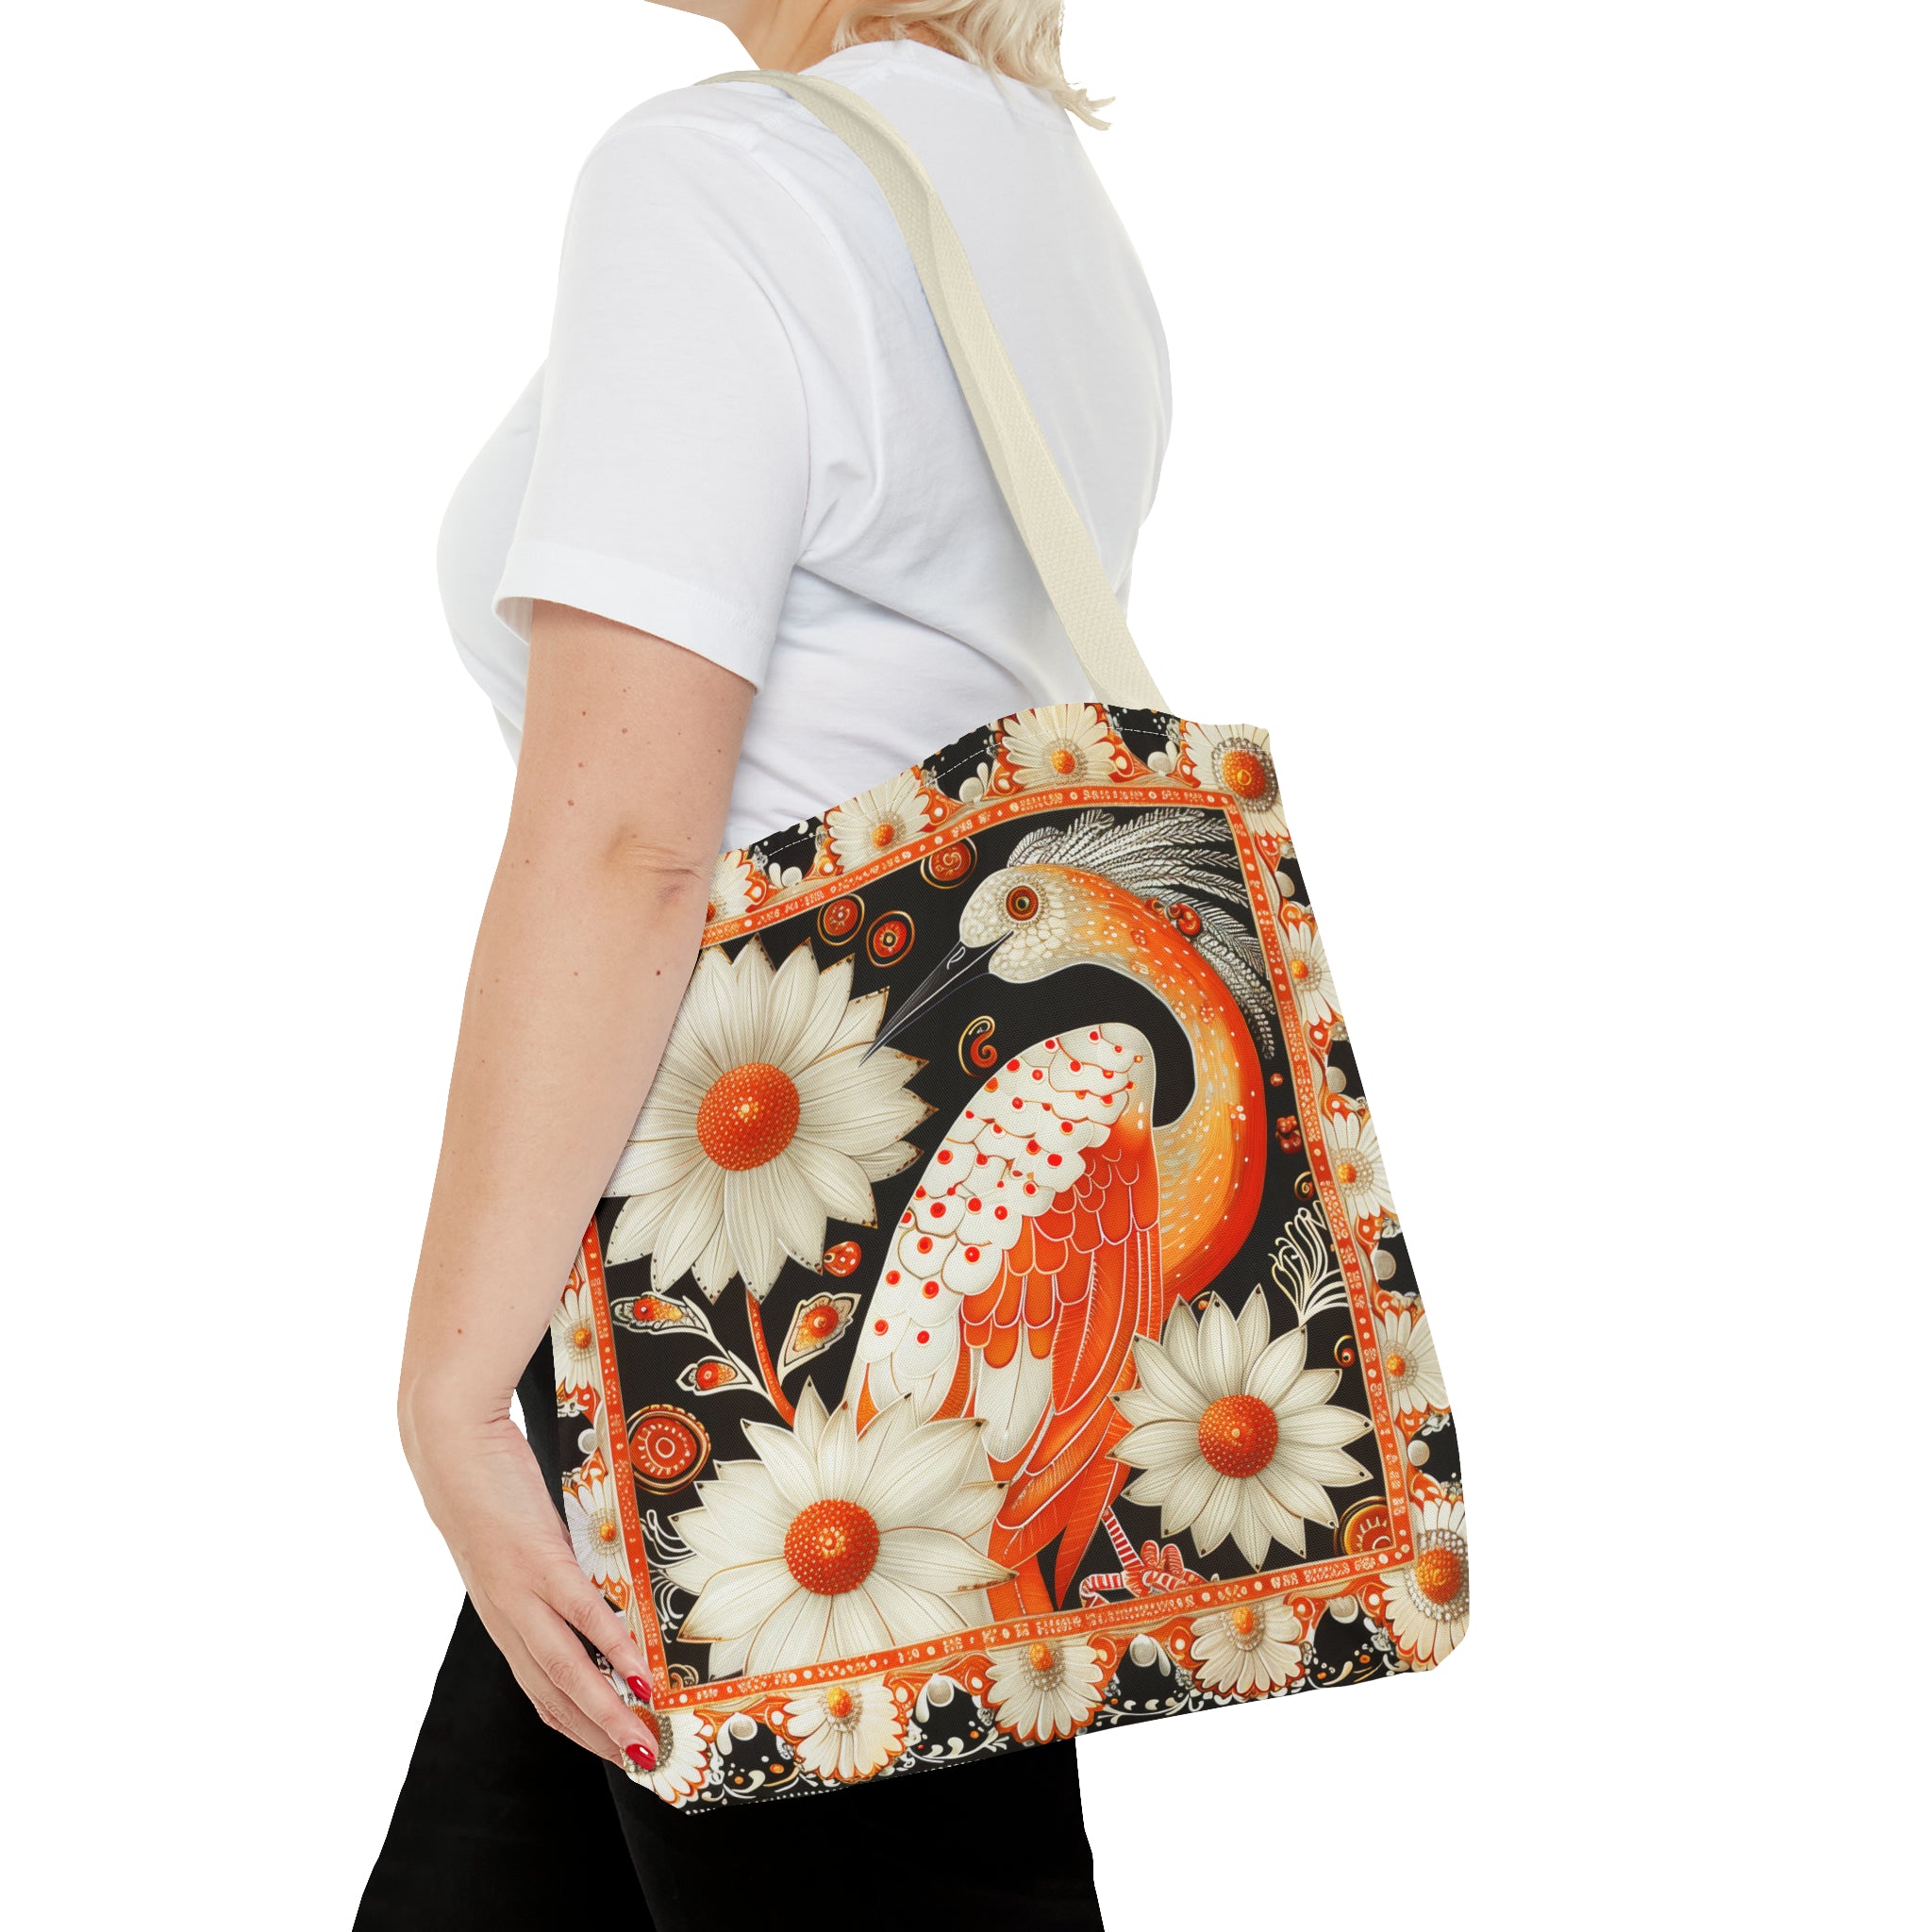 Canvas Tote Bag, inspired vintage orange stork design , vibrant artistic accessory, whimsical all over print bag in three sizes